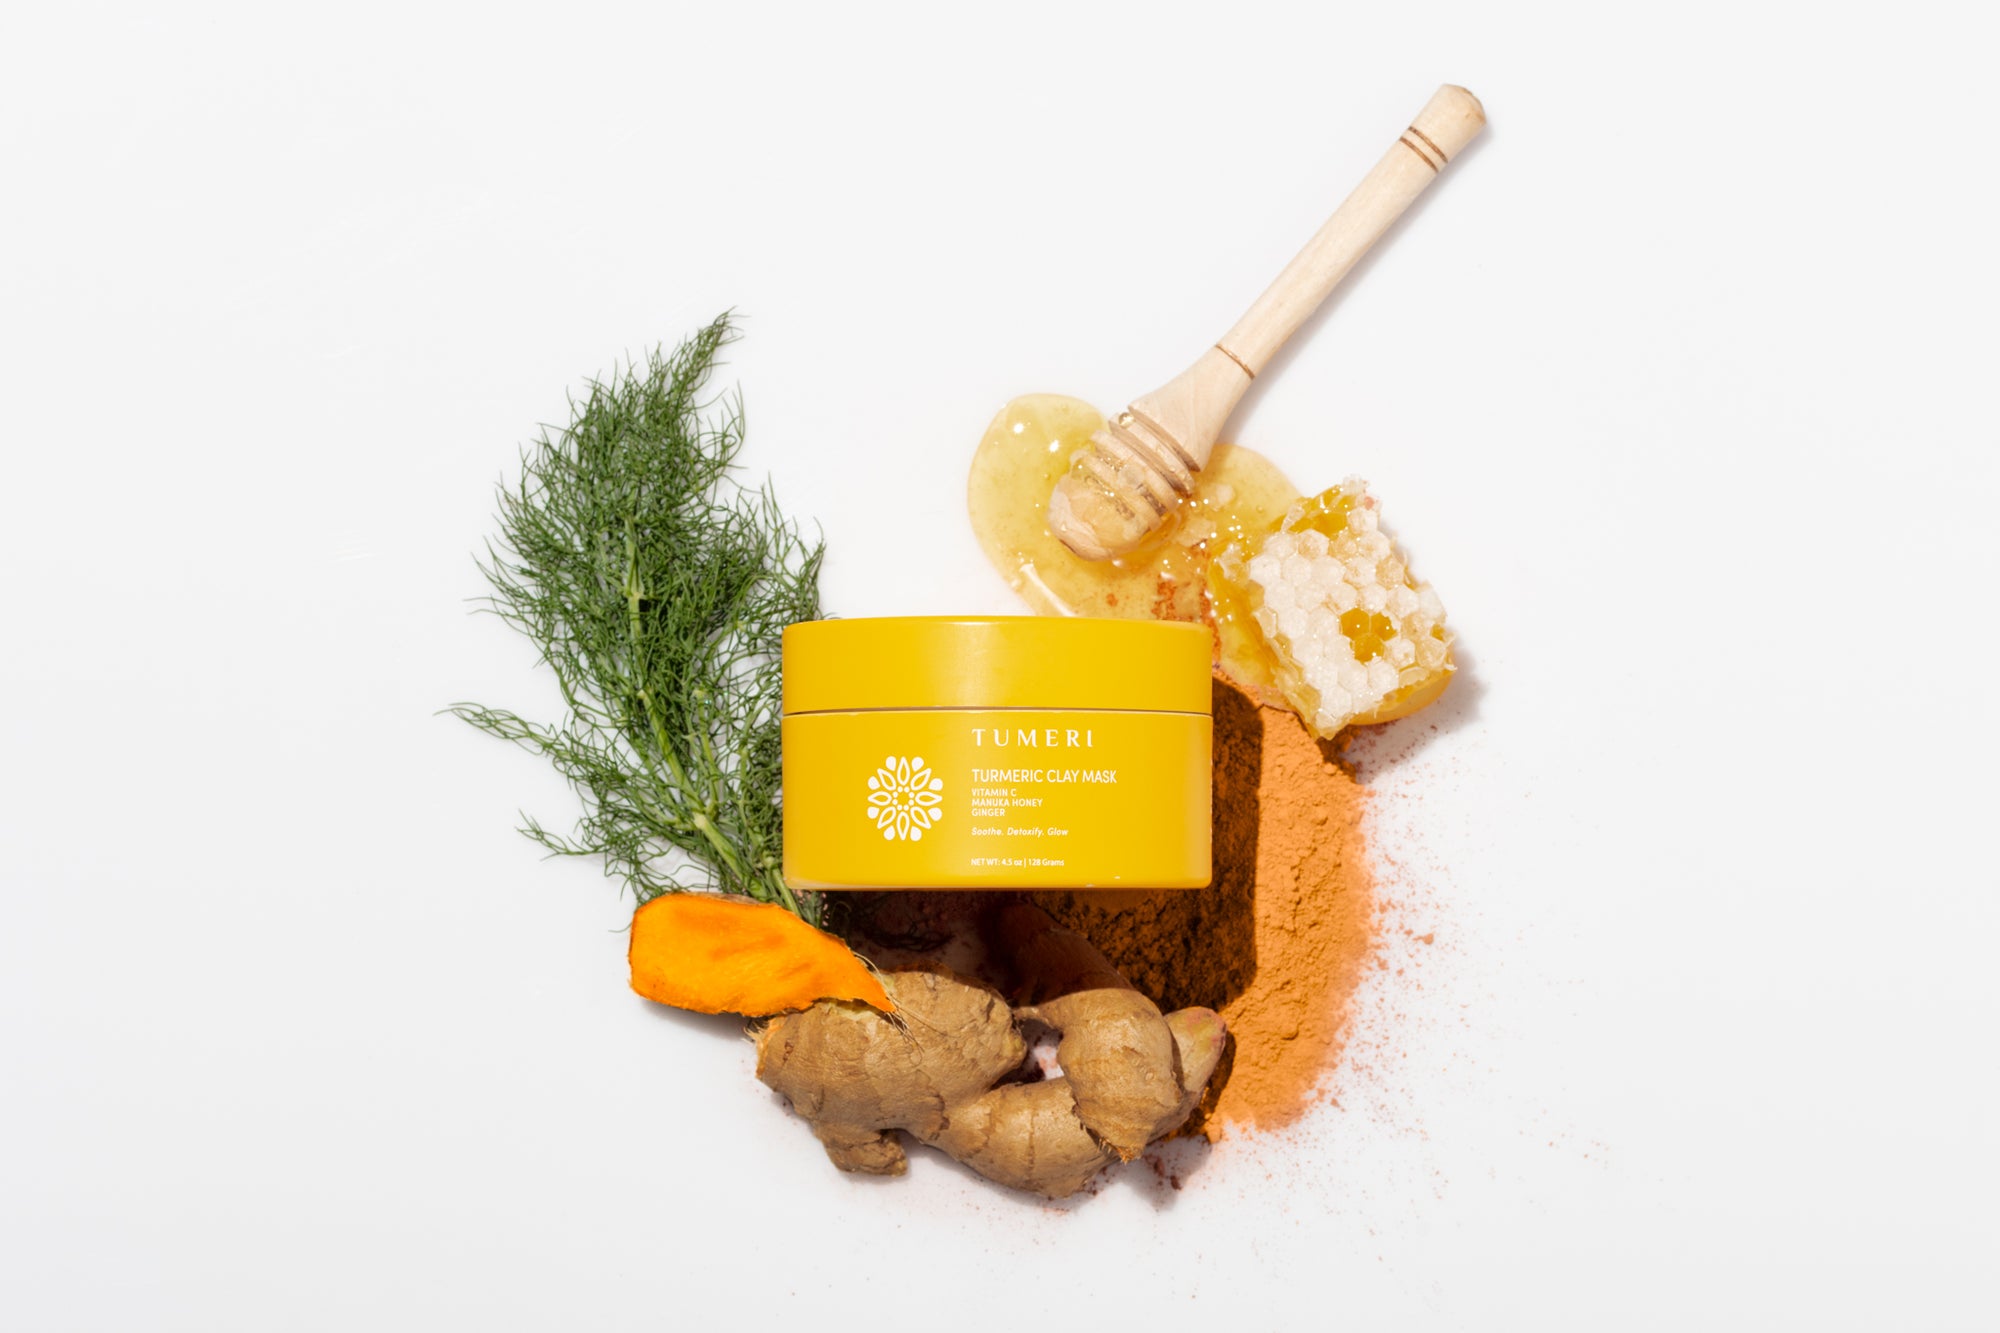 Skincare product shot with honey and ginger - mega menu preview